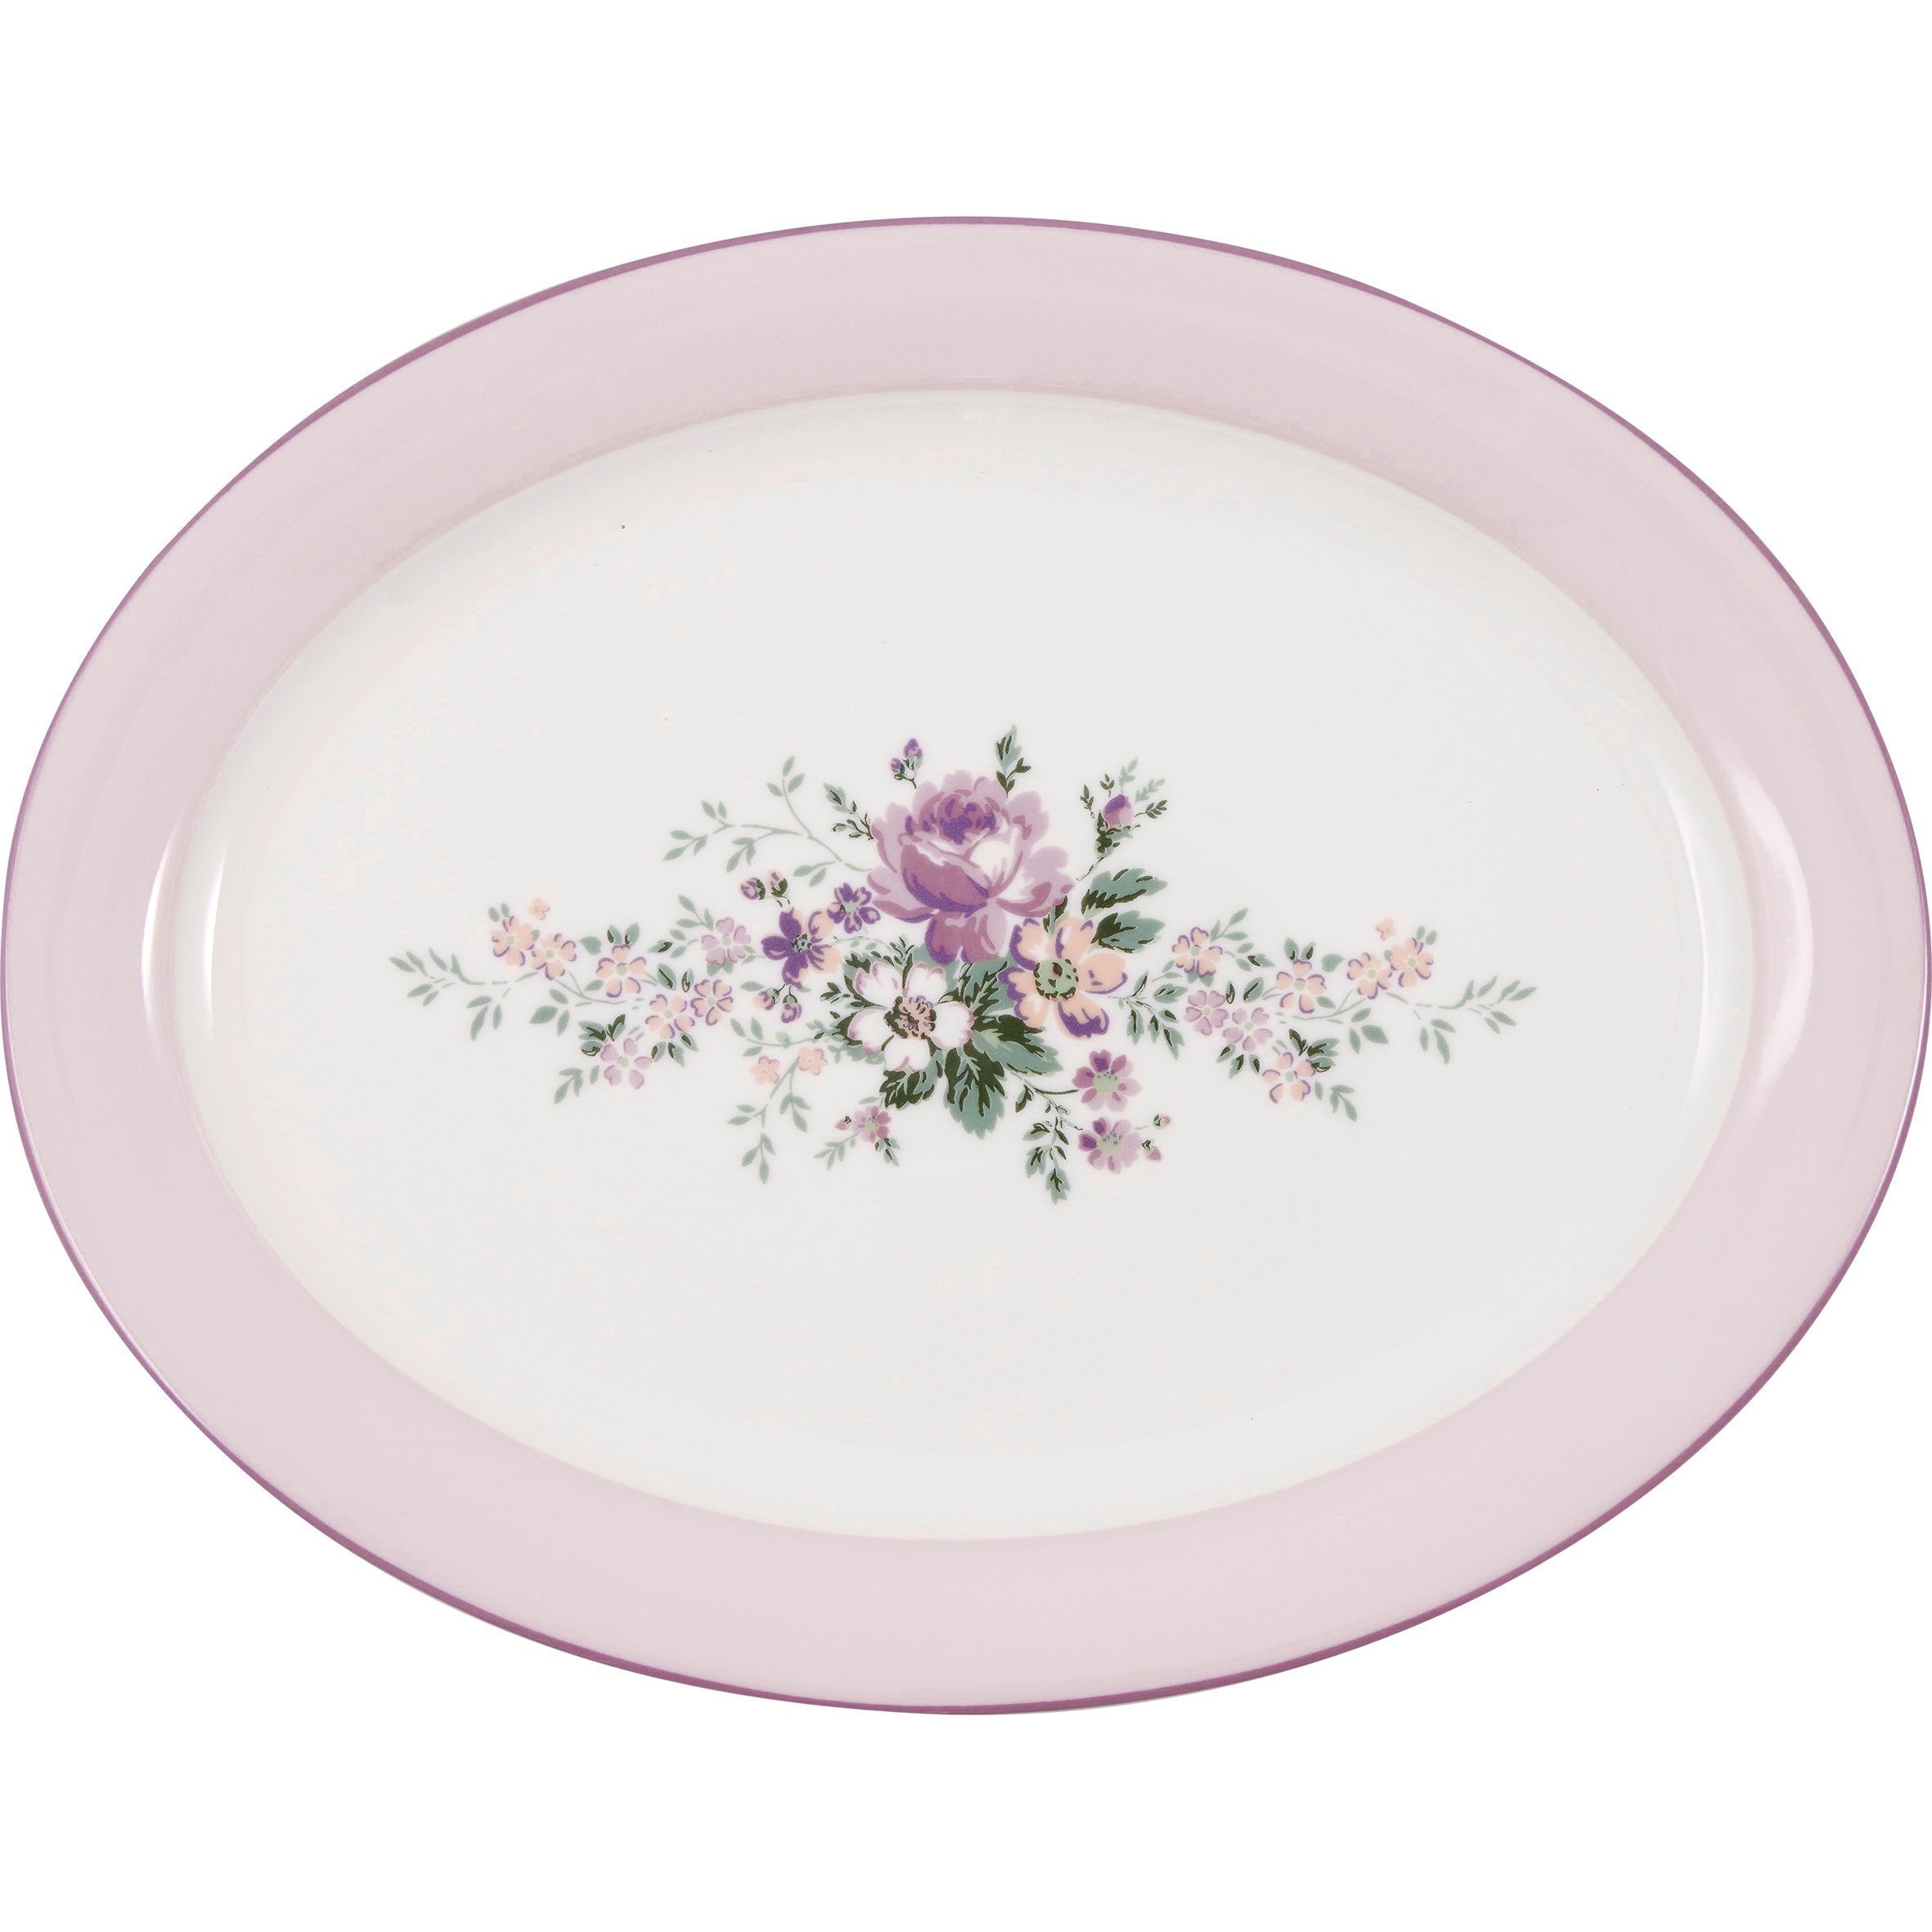 Greengate Servierplatte Greengate Servierplatte MARIE DUSTY ROSE Rosa Oval 25x33 cm